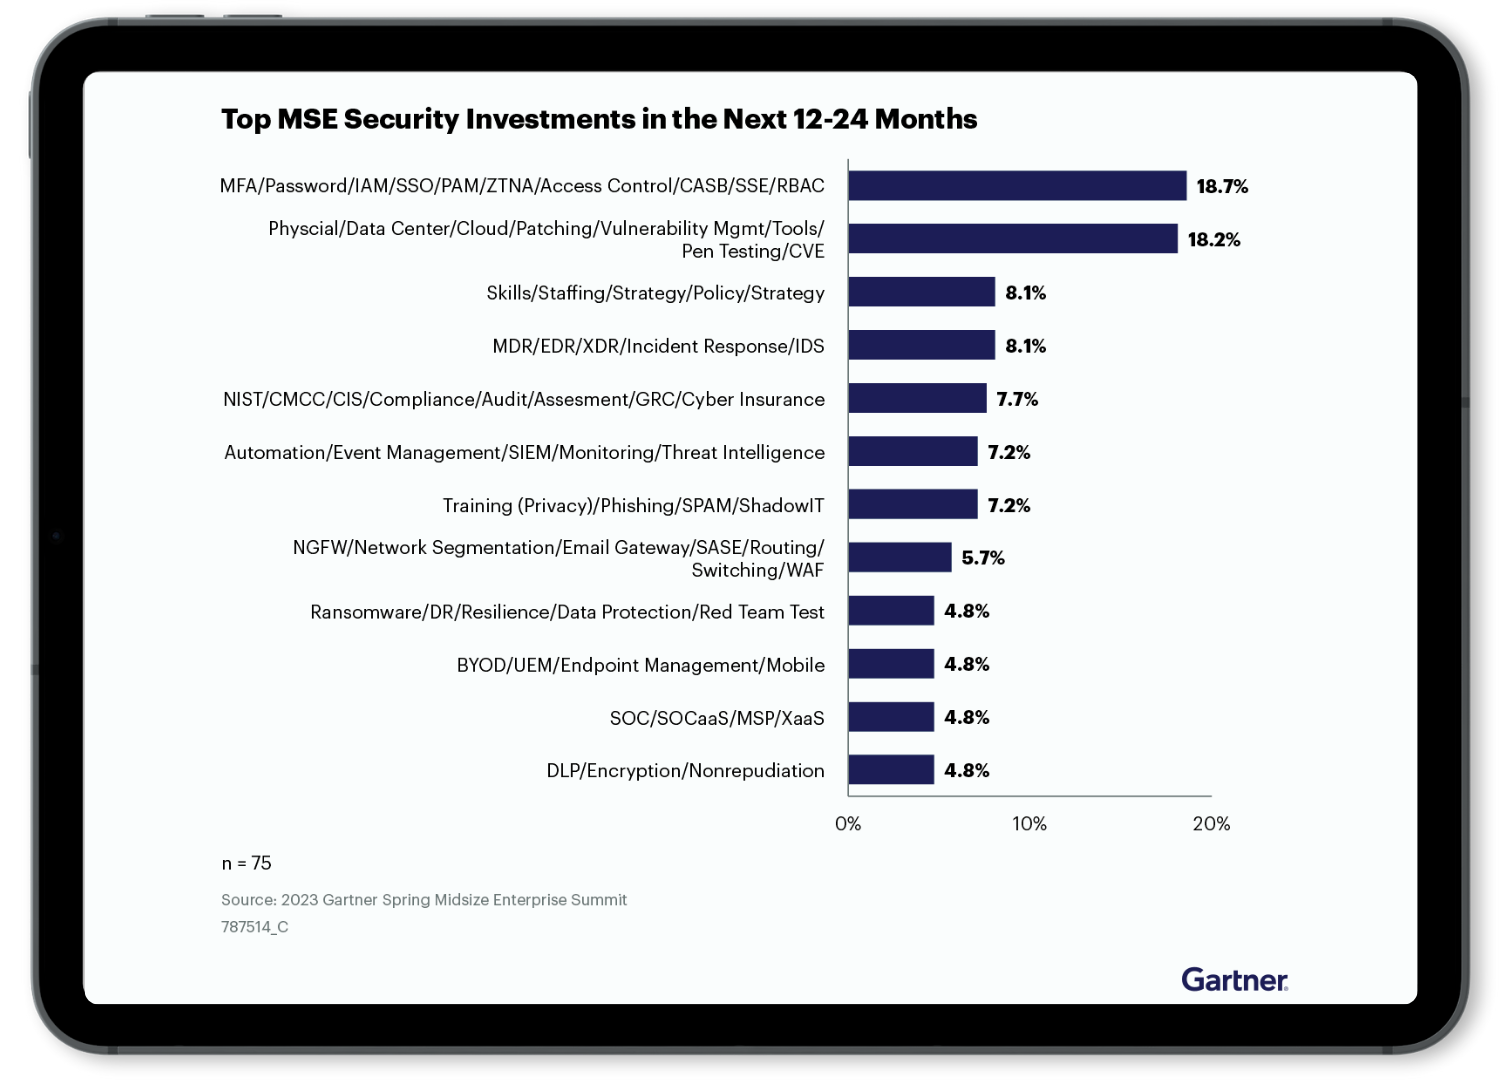 Figure 2 Top MSE Security Investments in the Next 12-24 Months (1)